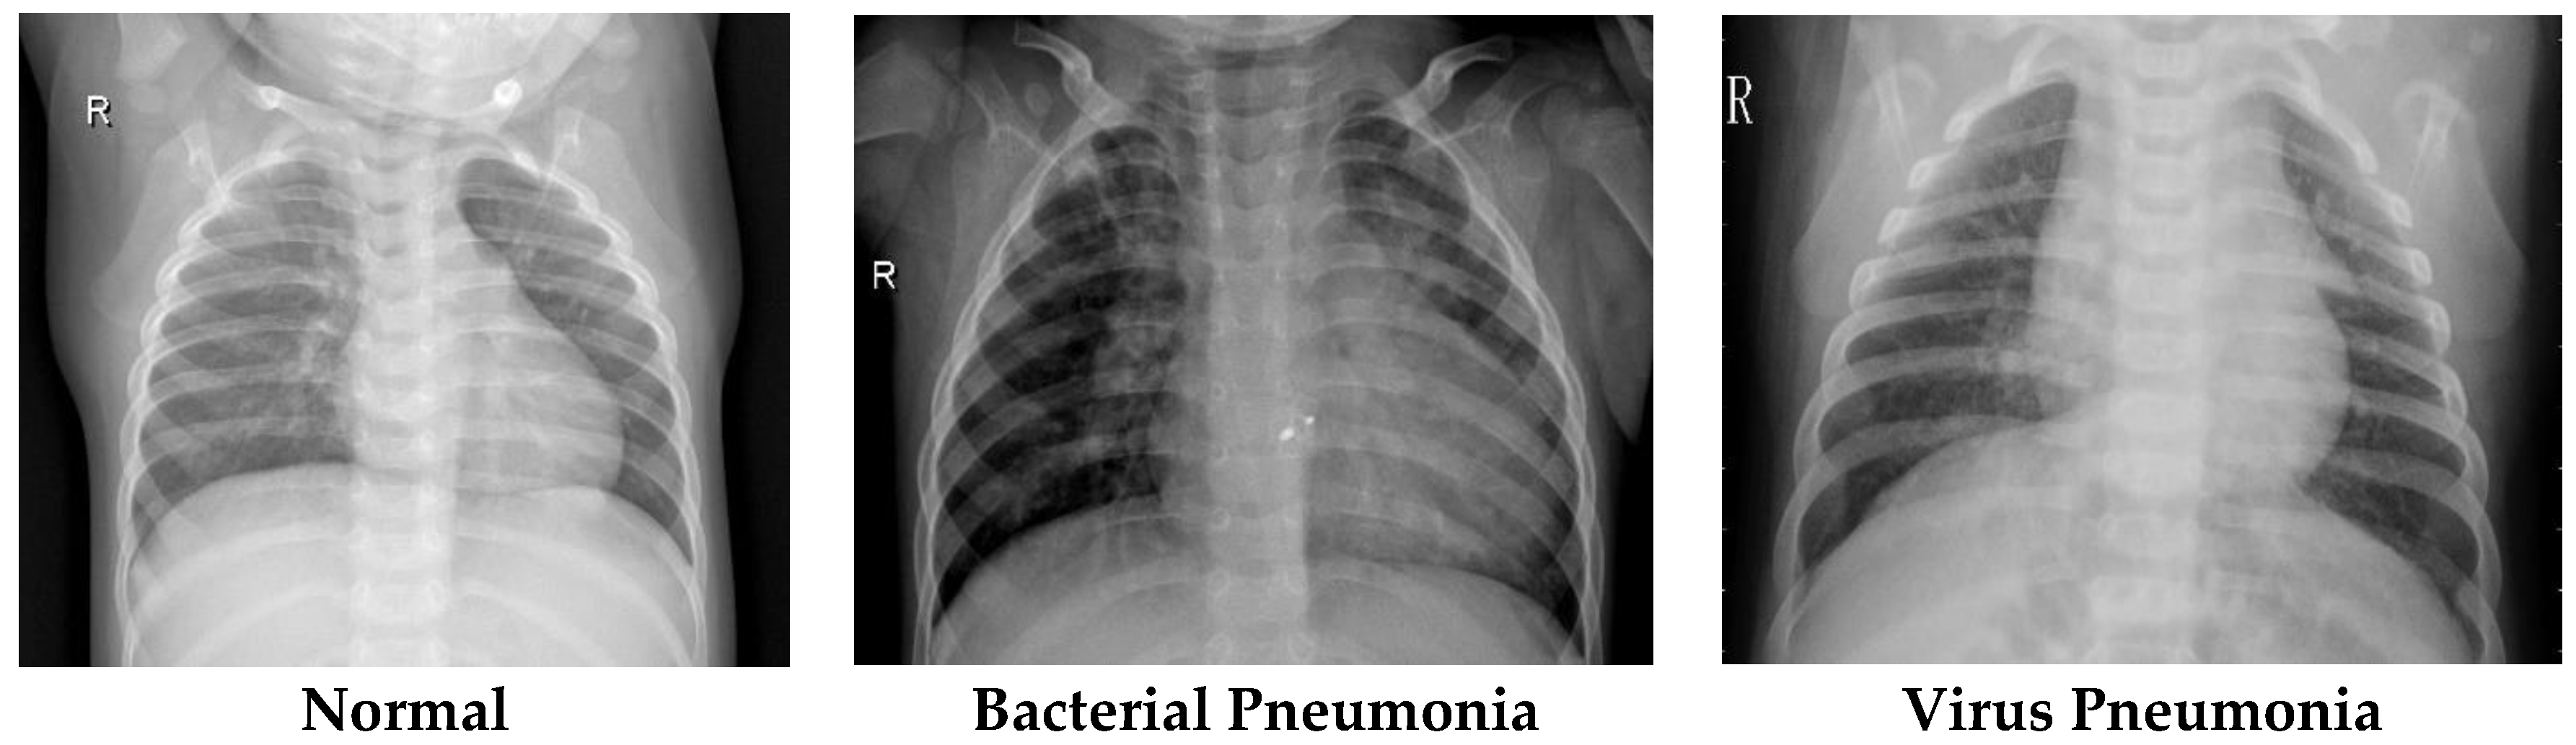 Applied Sciences Free Full Text A Novel Transfer Learning Based Approach For Pneumonia Detection In Chest X Ray Images Html